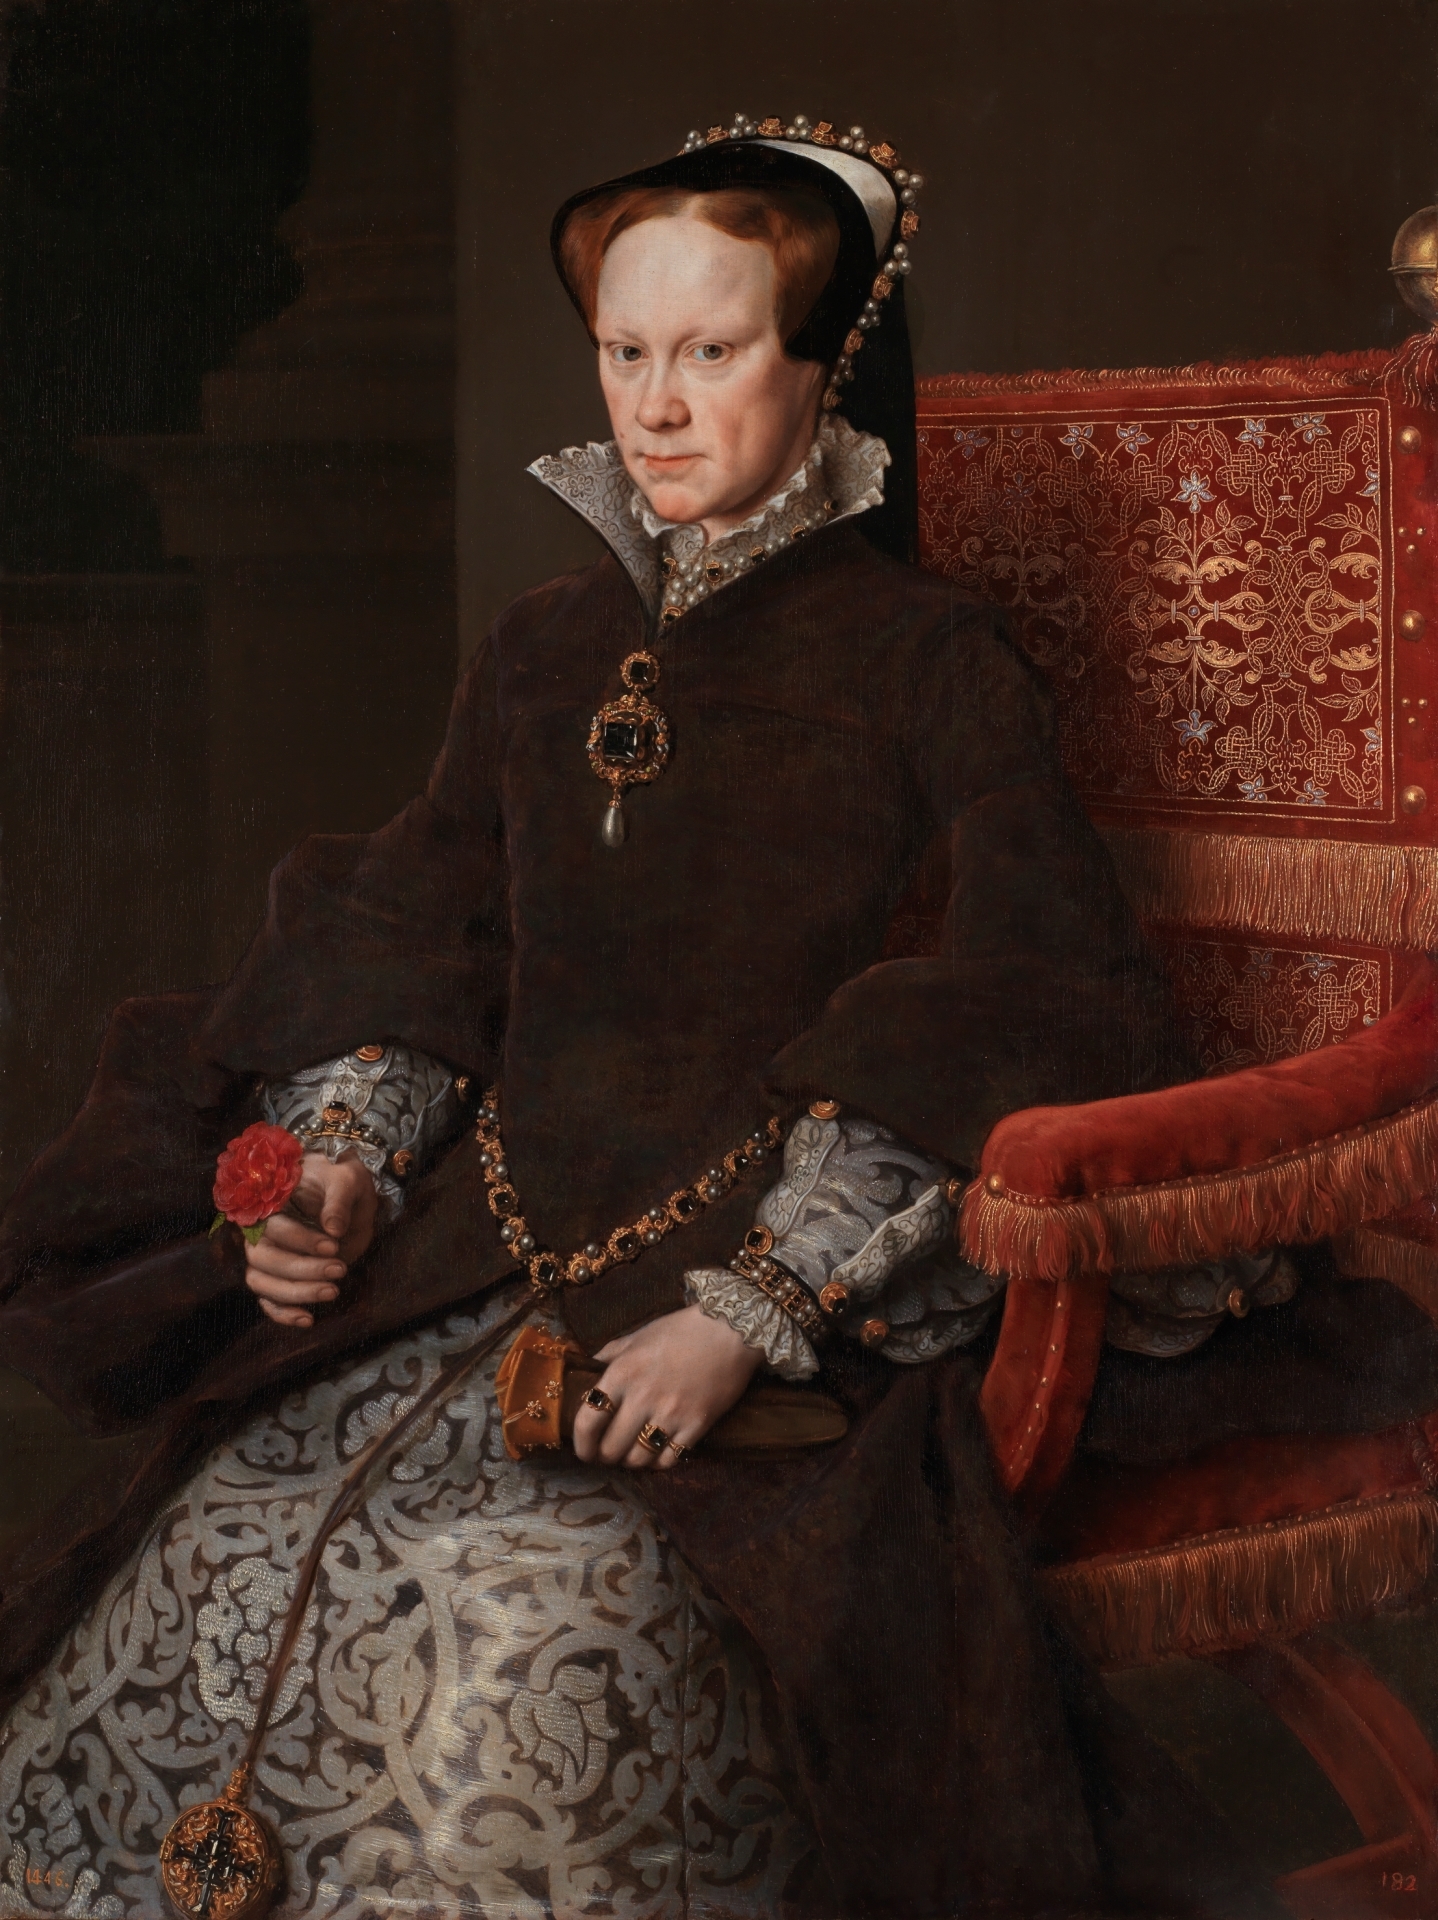 Mary Tudor, Queen of England, Second image